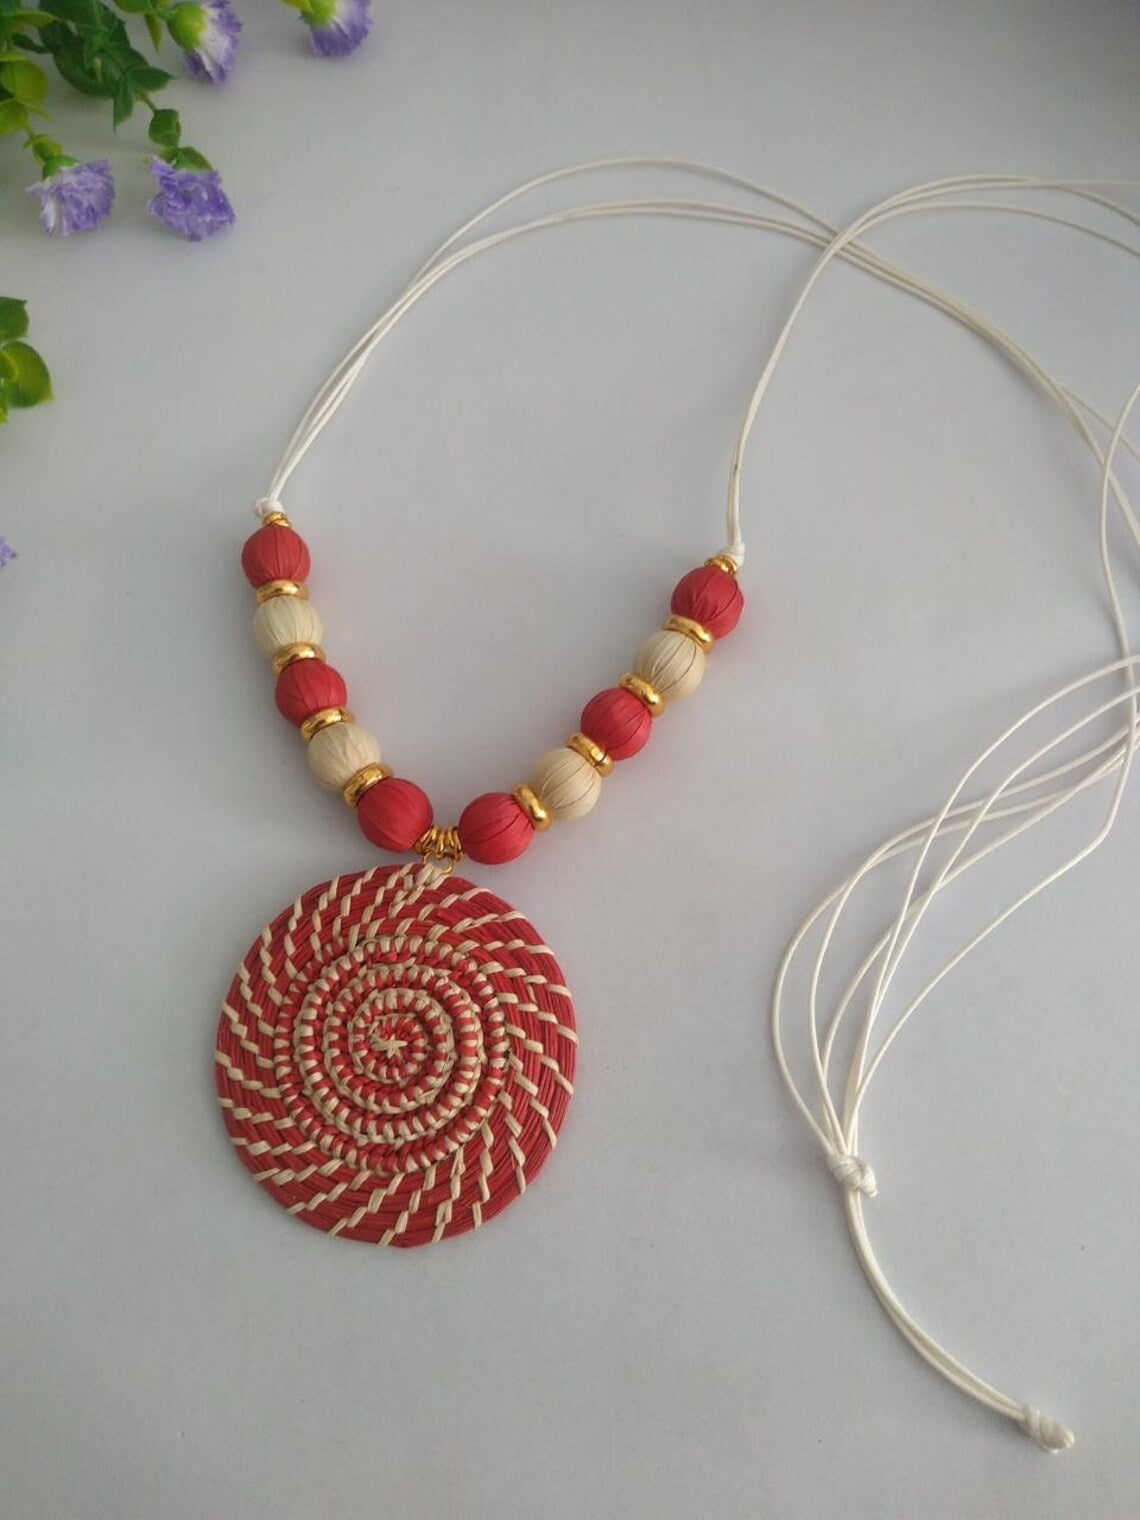 Iraca Palm Pendant Necklace and Earrings Set in Red and Beige Color